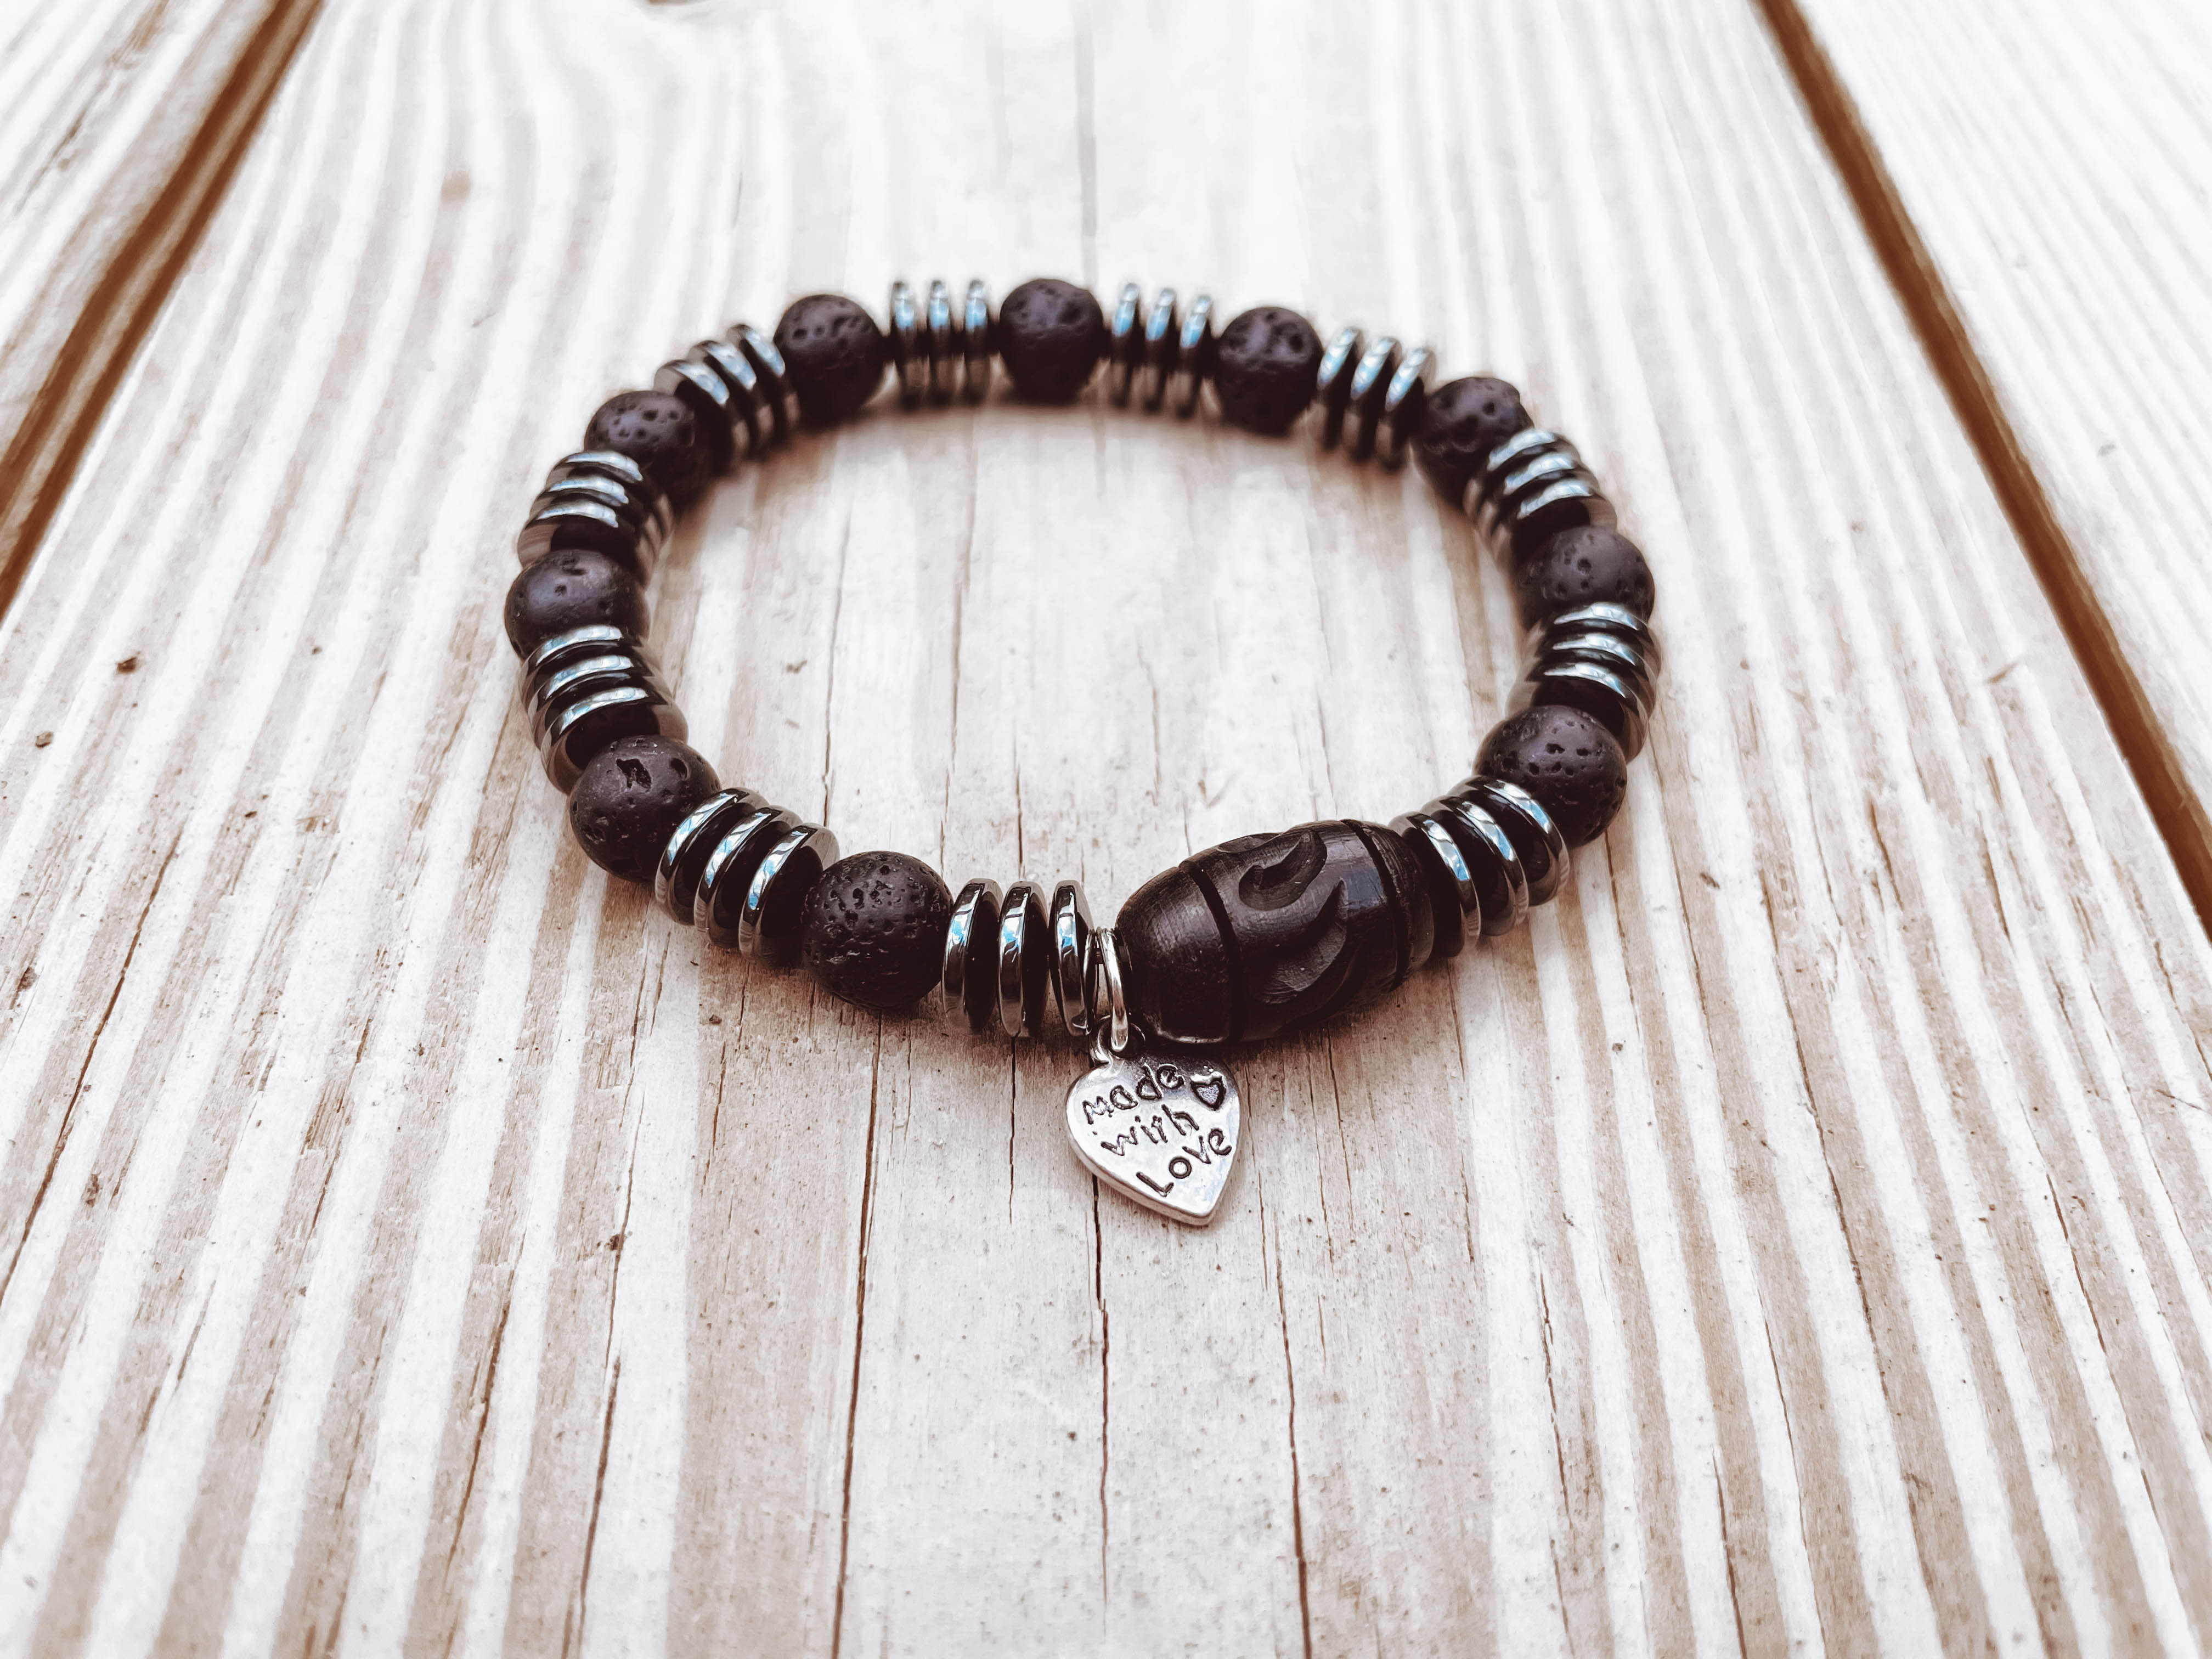 Black Hematite and Lava Stone Stretch Bracelet Stretch bracelet with black hematite disks, lava stones, and wooden carved Celtic beads.